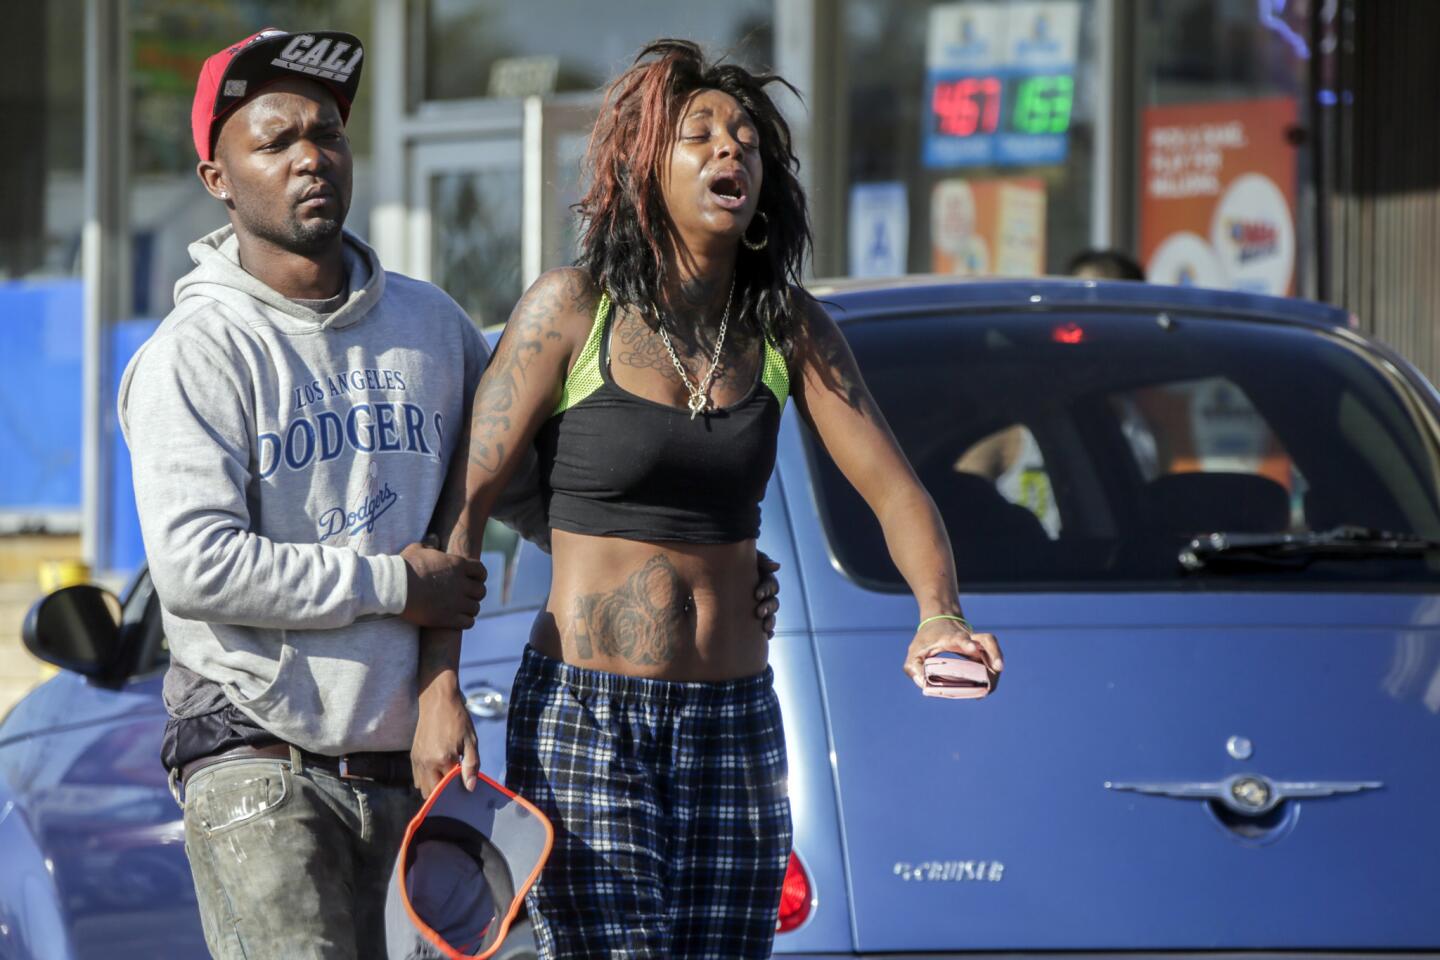 Grieving stepfather Leonard Grant, 27, left, and Ebony Newman, 27, mother of 9-year-old Travon Williams in front of the liquor store where the shooting occurred.